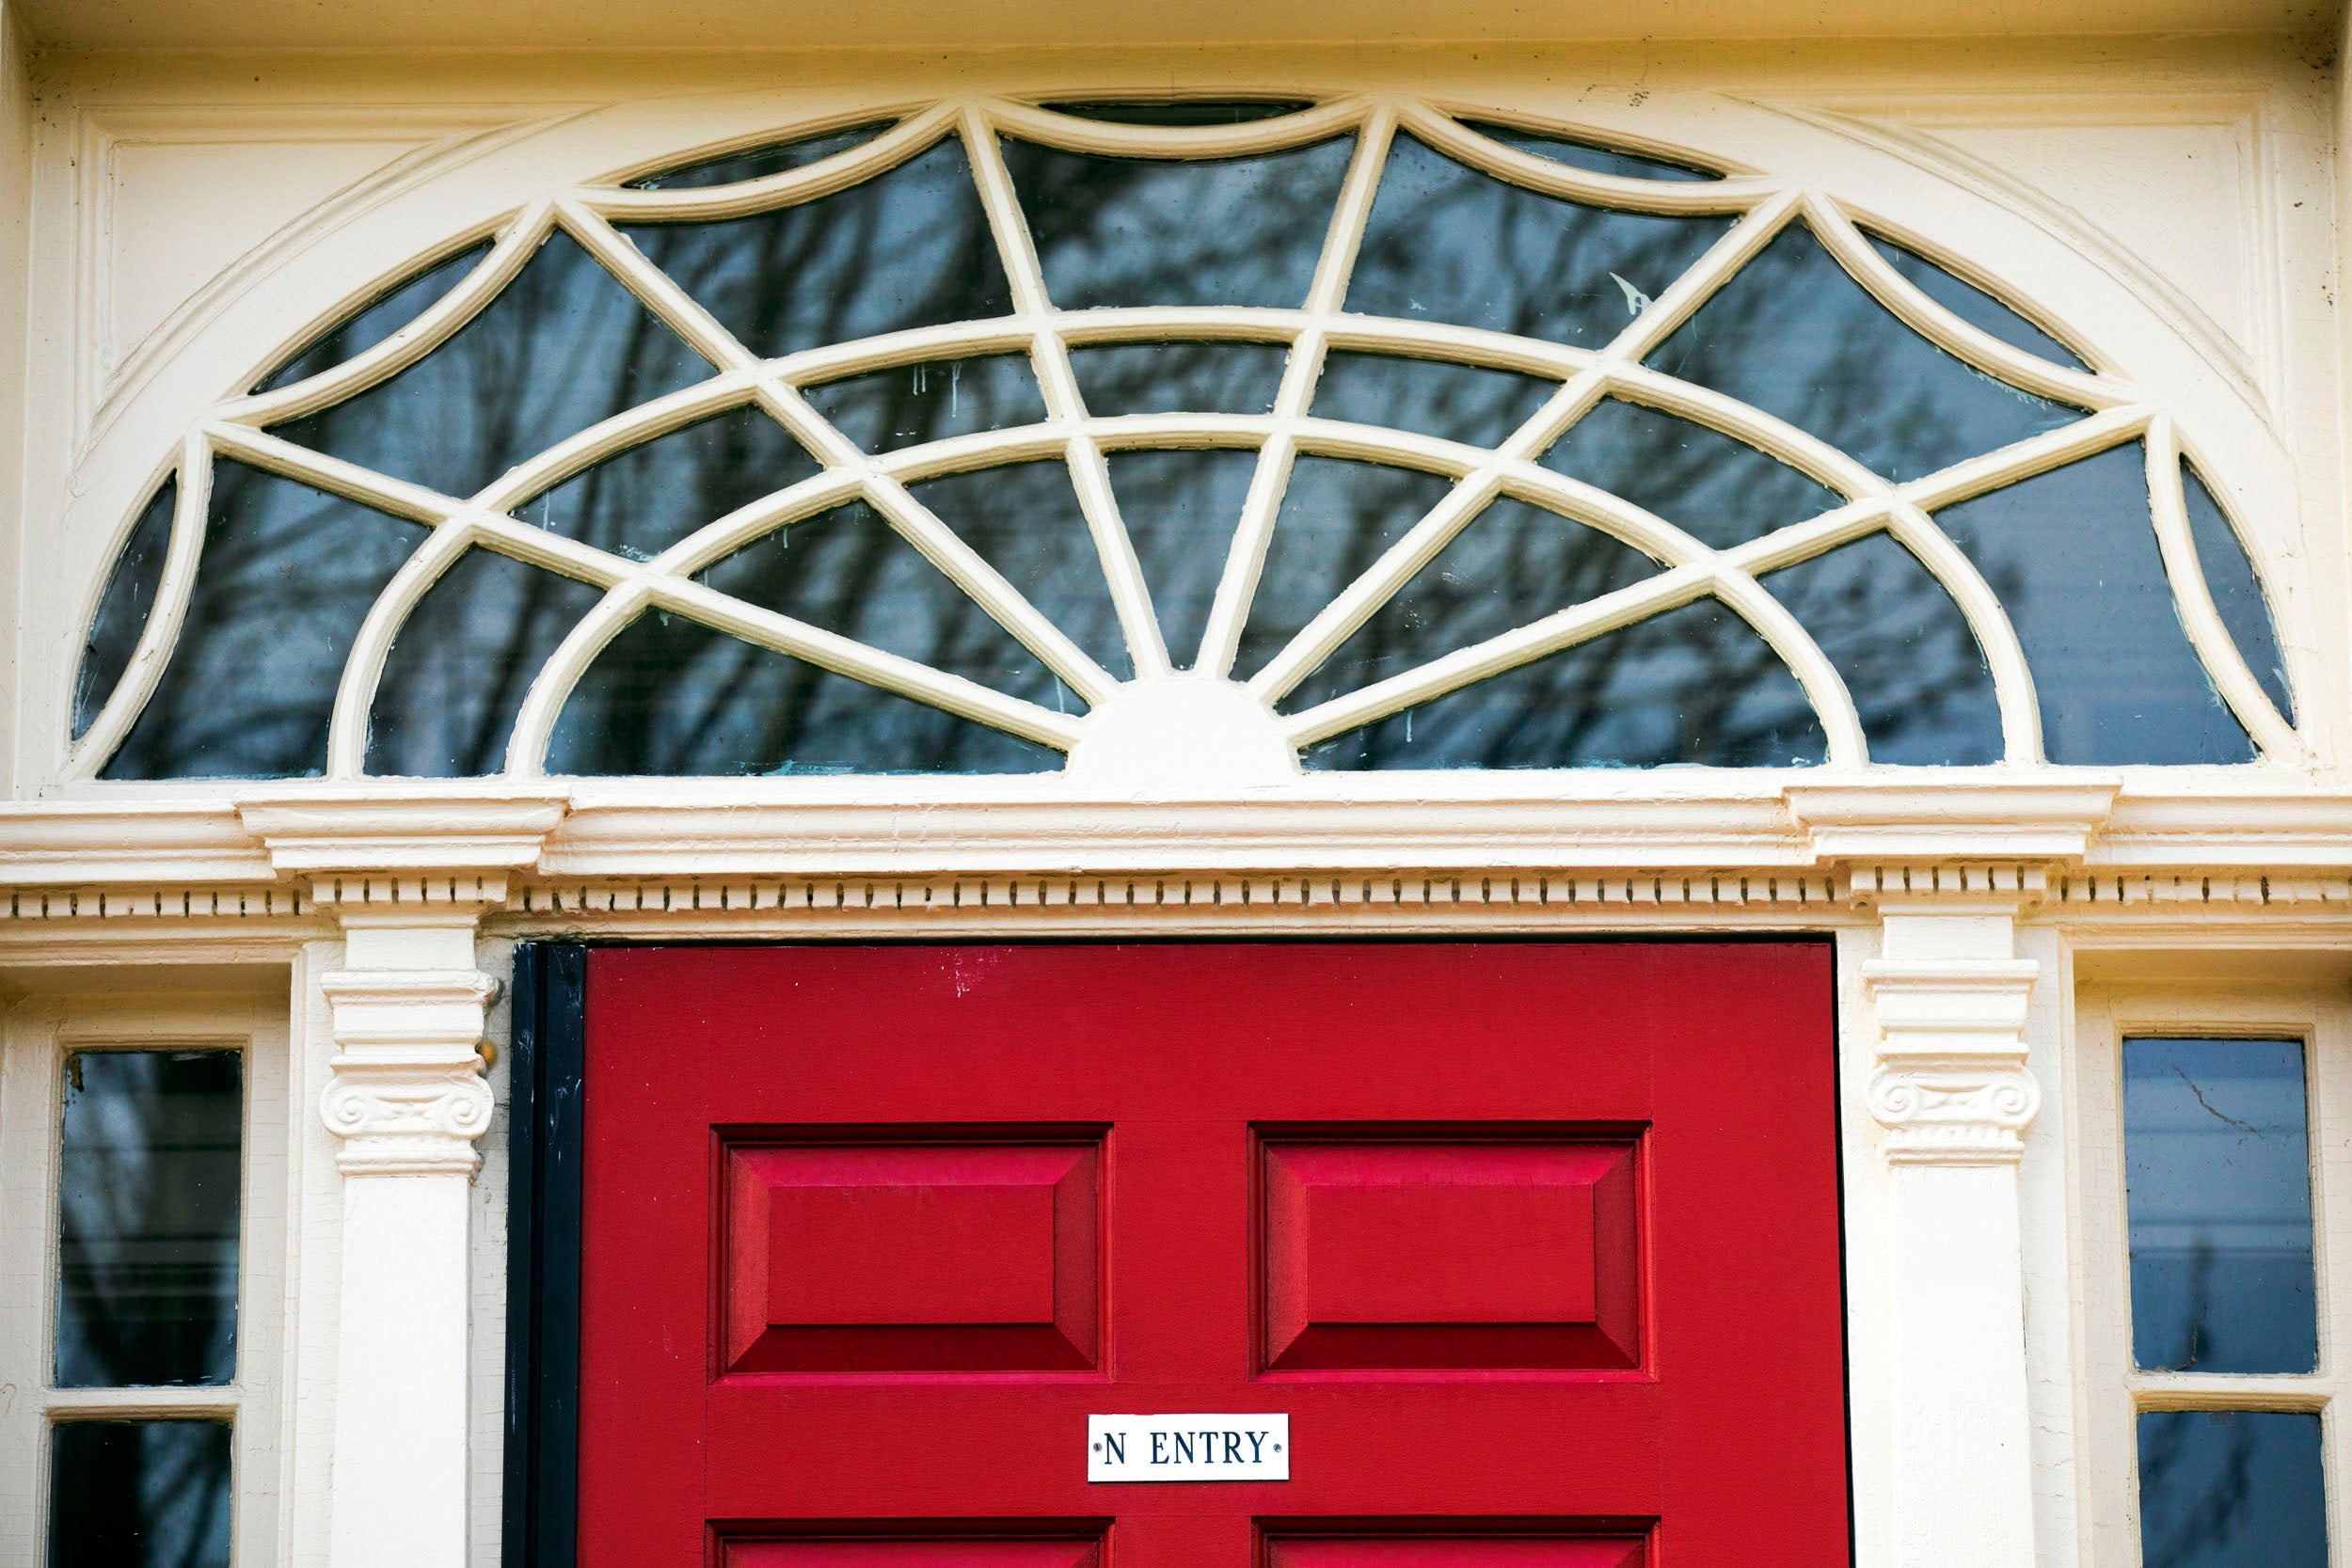 The red entrance to Cabot House is pictured.